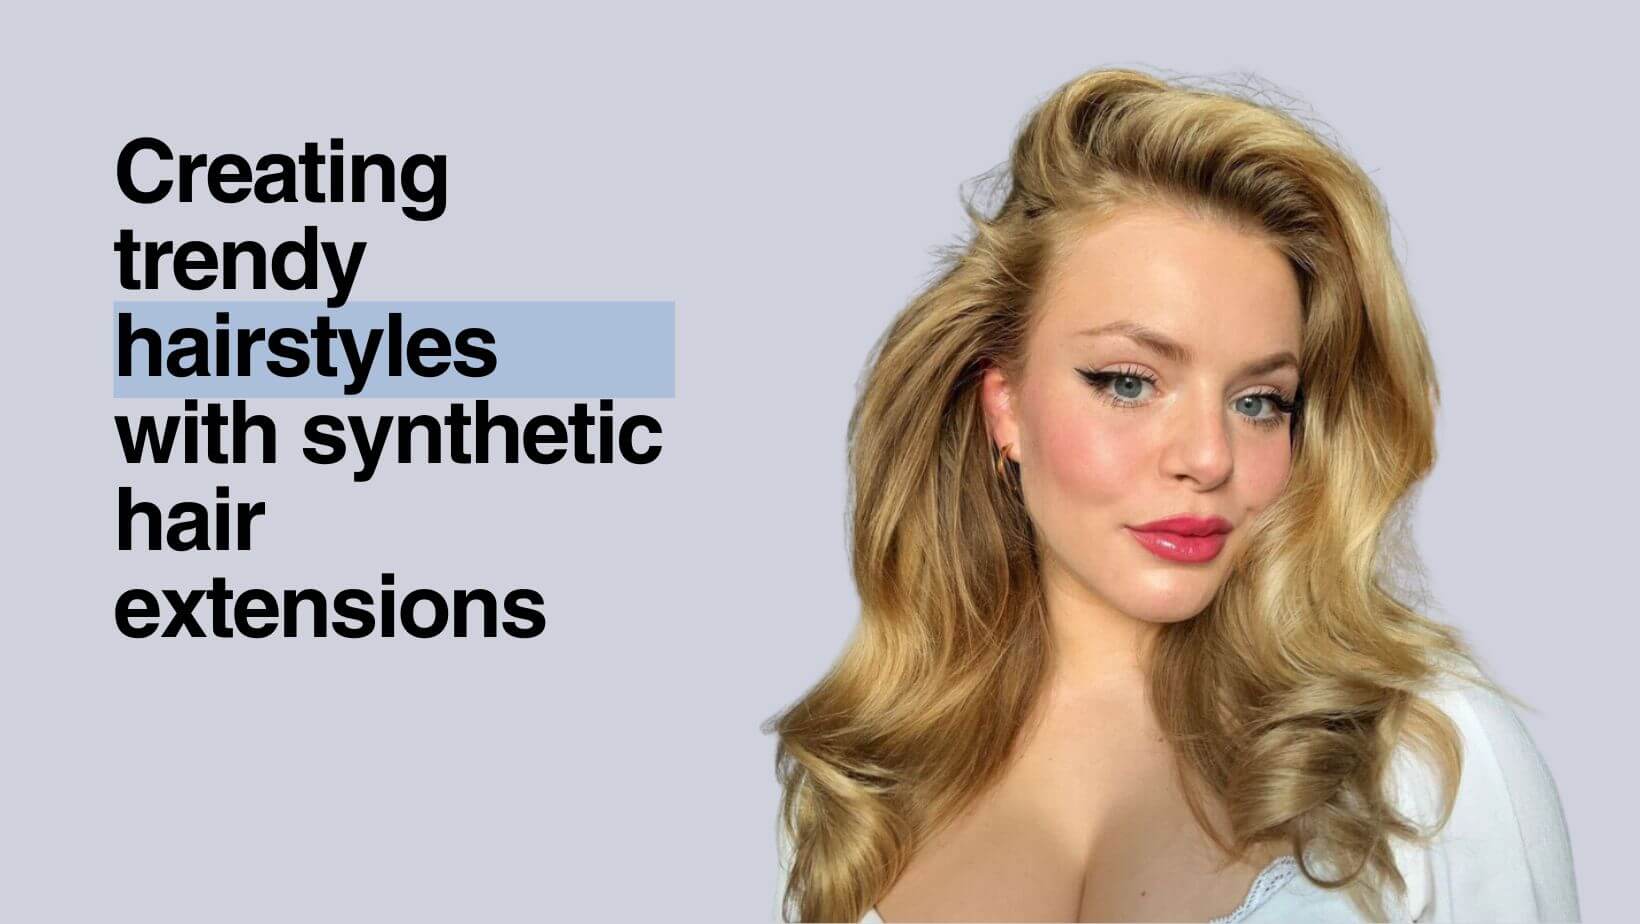 Creating trendy hairstyles with synthetic hair extensions